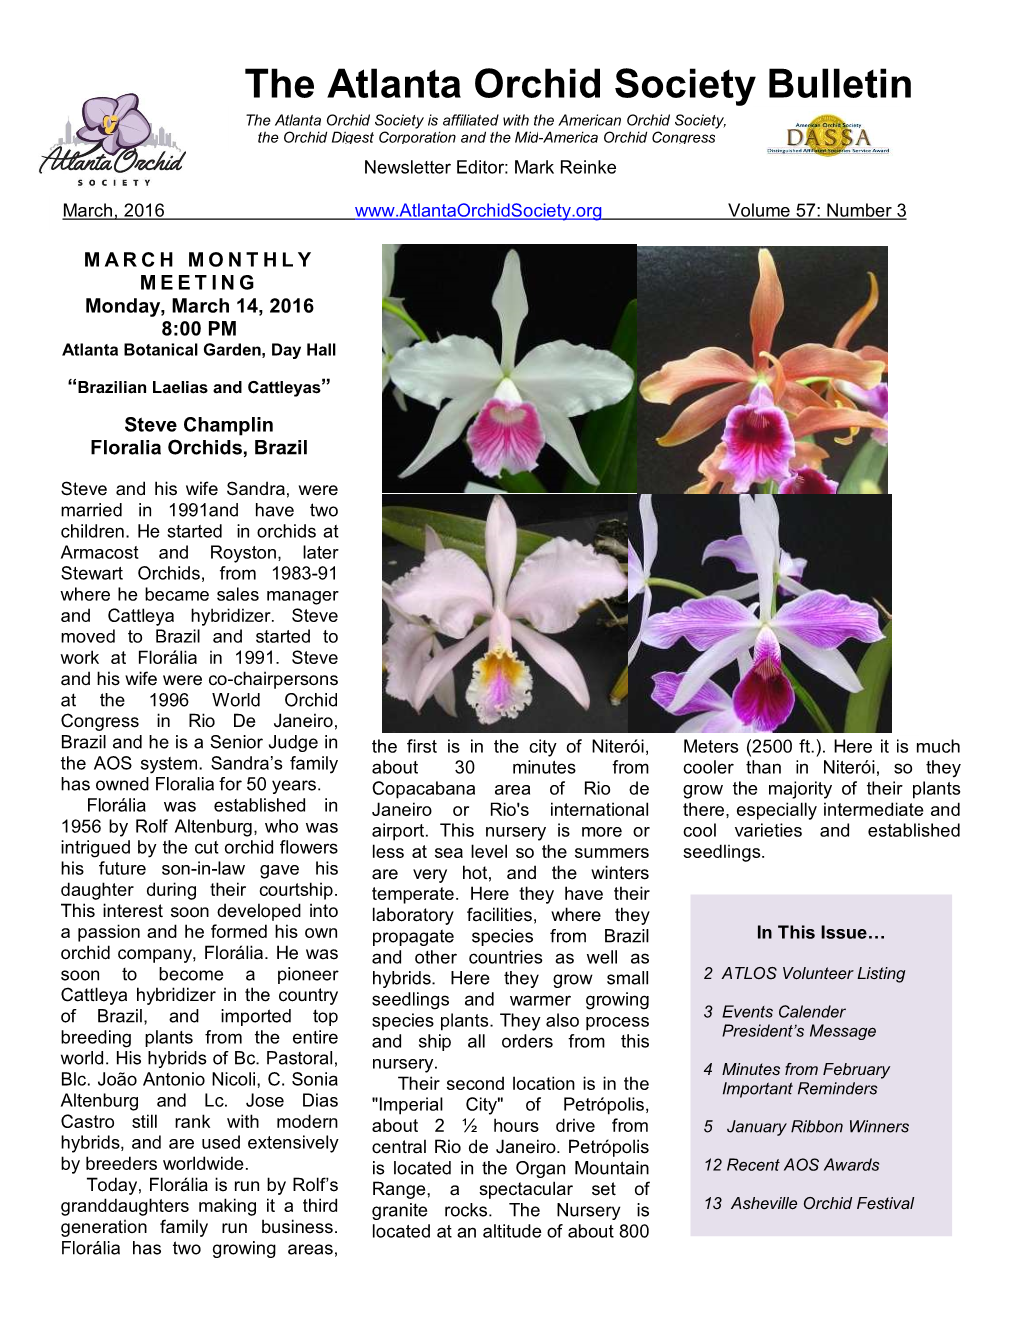 March 2016 Orchid Show